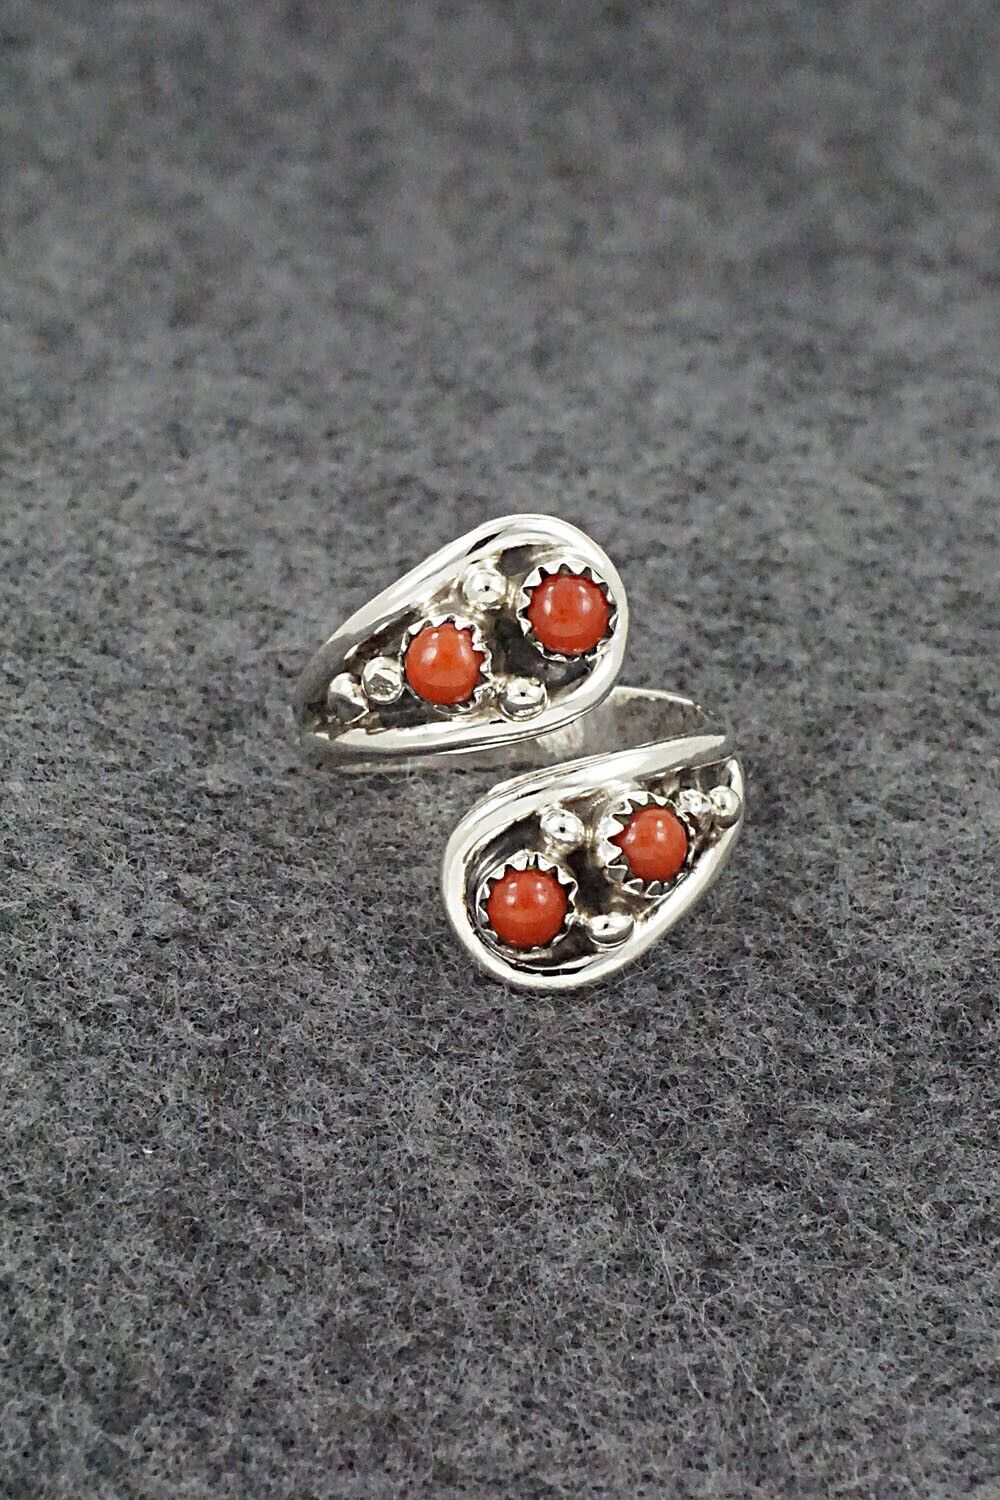 Coral & Sterling Silver Ring - Annette Chiquito - Size 9.5